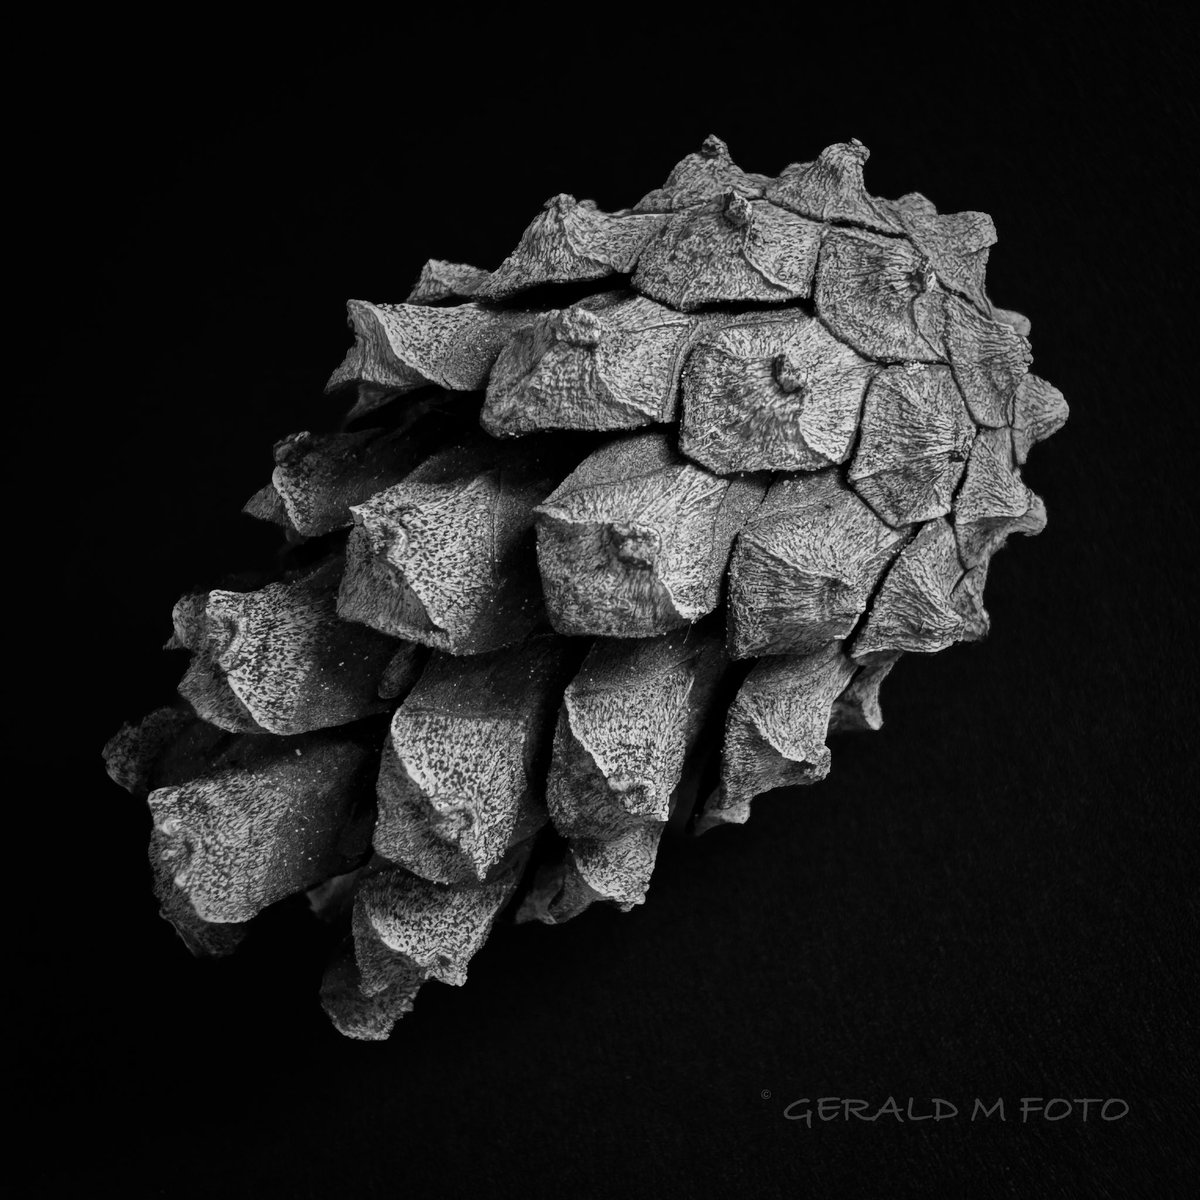 [ Pinecone II ] approx. 1,5 inches long, found on the ground while walking the dog, shot in macro mode with iPhone 15Pro #macrophotography #ThePhotoHour #bnw_macro #blackandwhitephotography #ThePhotoHour